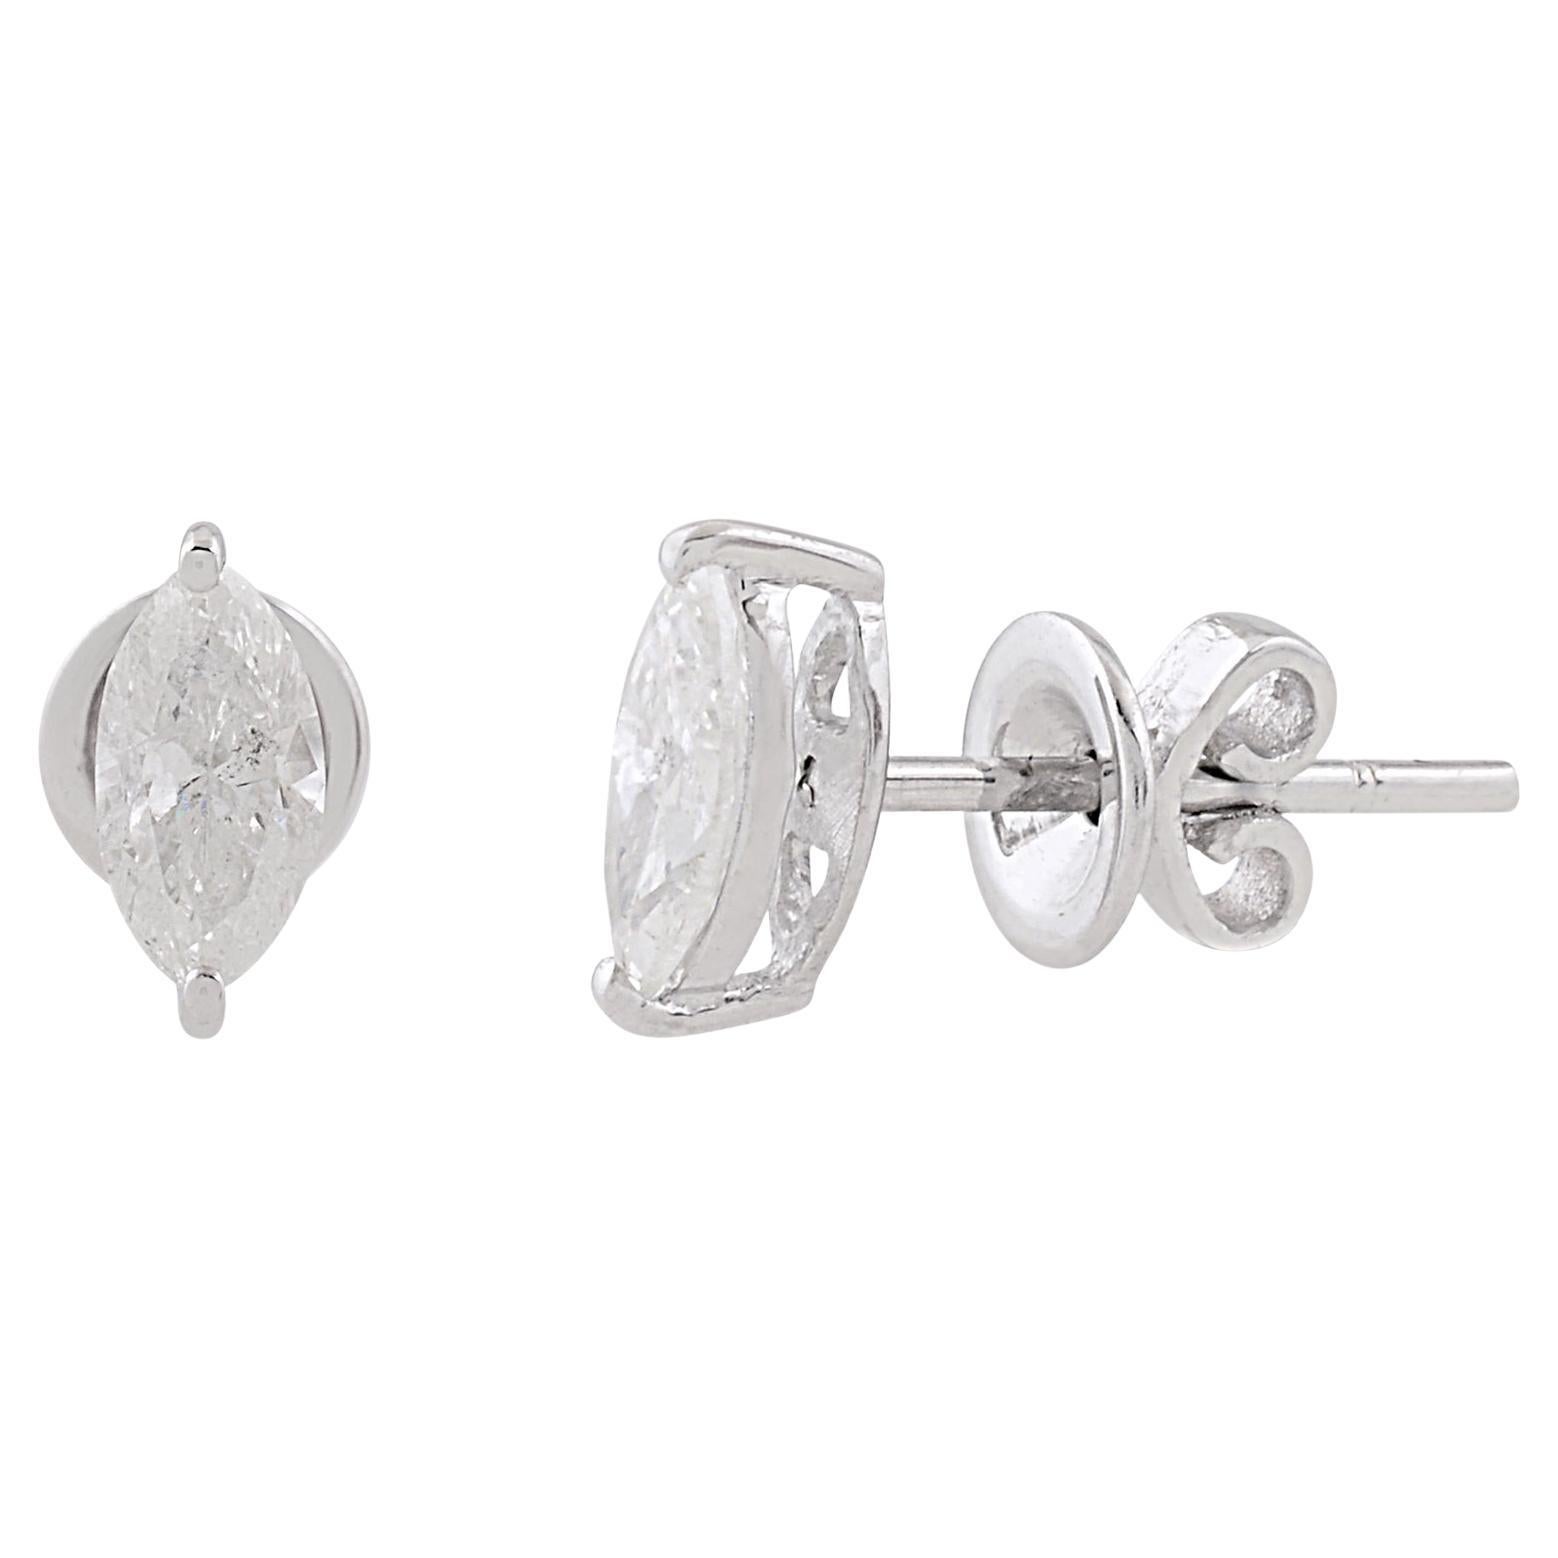 0.82 Carat Solitaire Marquise Diamond Stud Earrings Solid 10k White Gold Jewelry